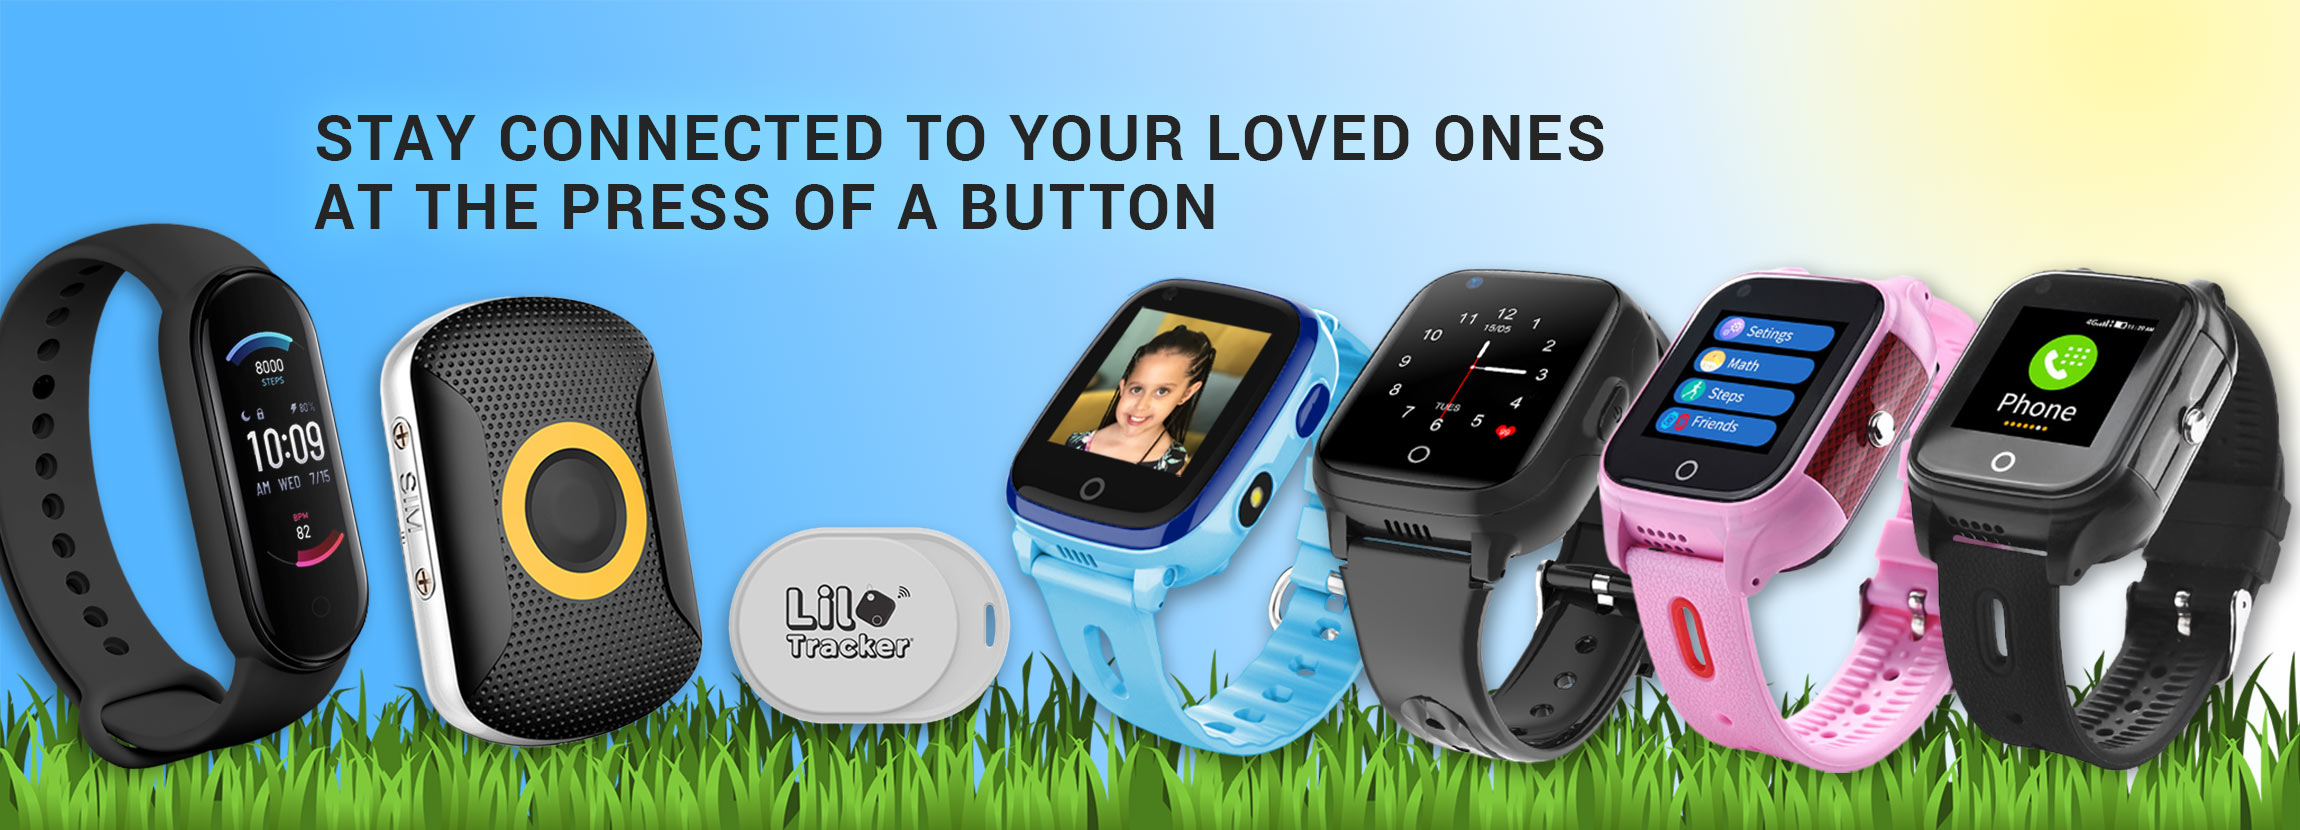 GPS Tracking Devices for Kids and Seniors, GPS 4G Smartwatch Tracker